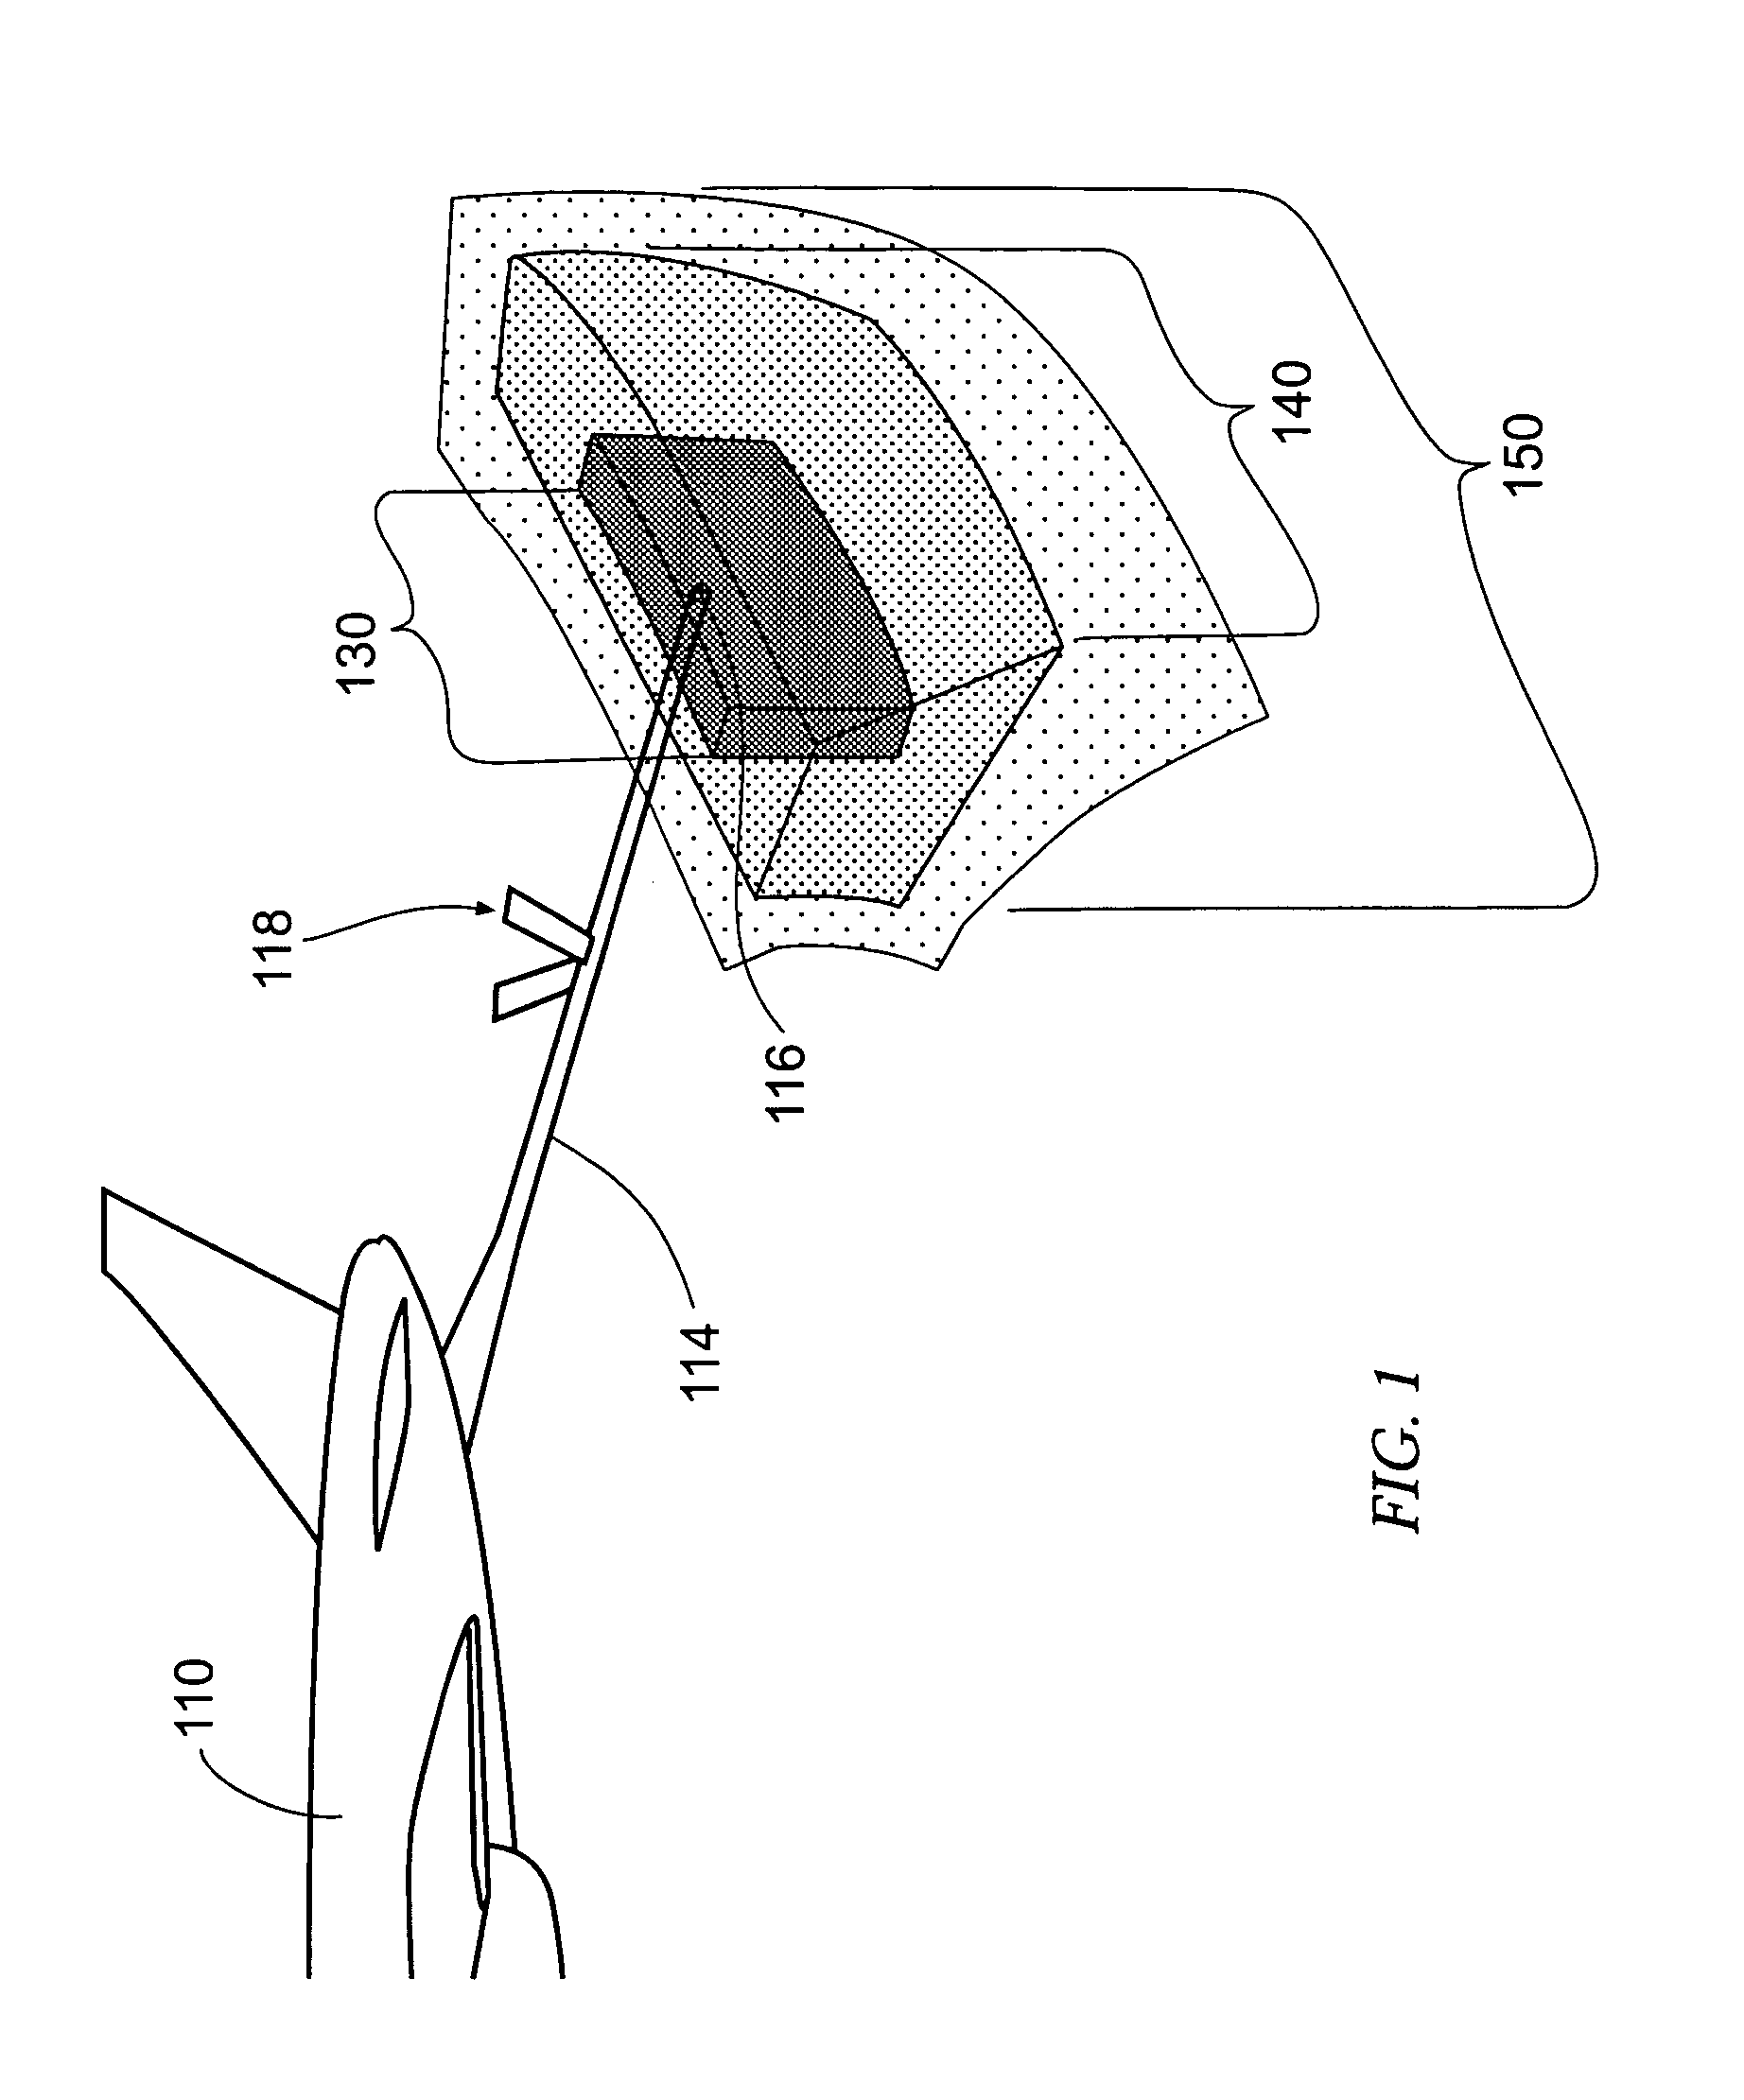 Positioning system, device, and method for in-flight refueling